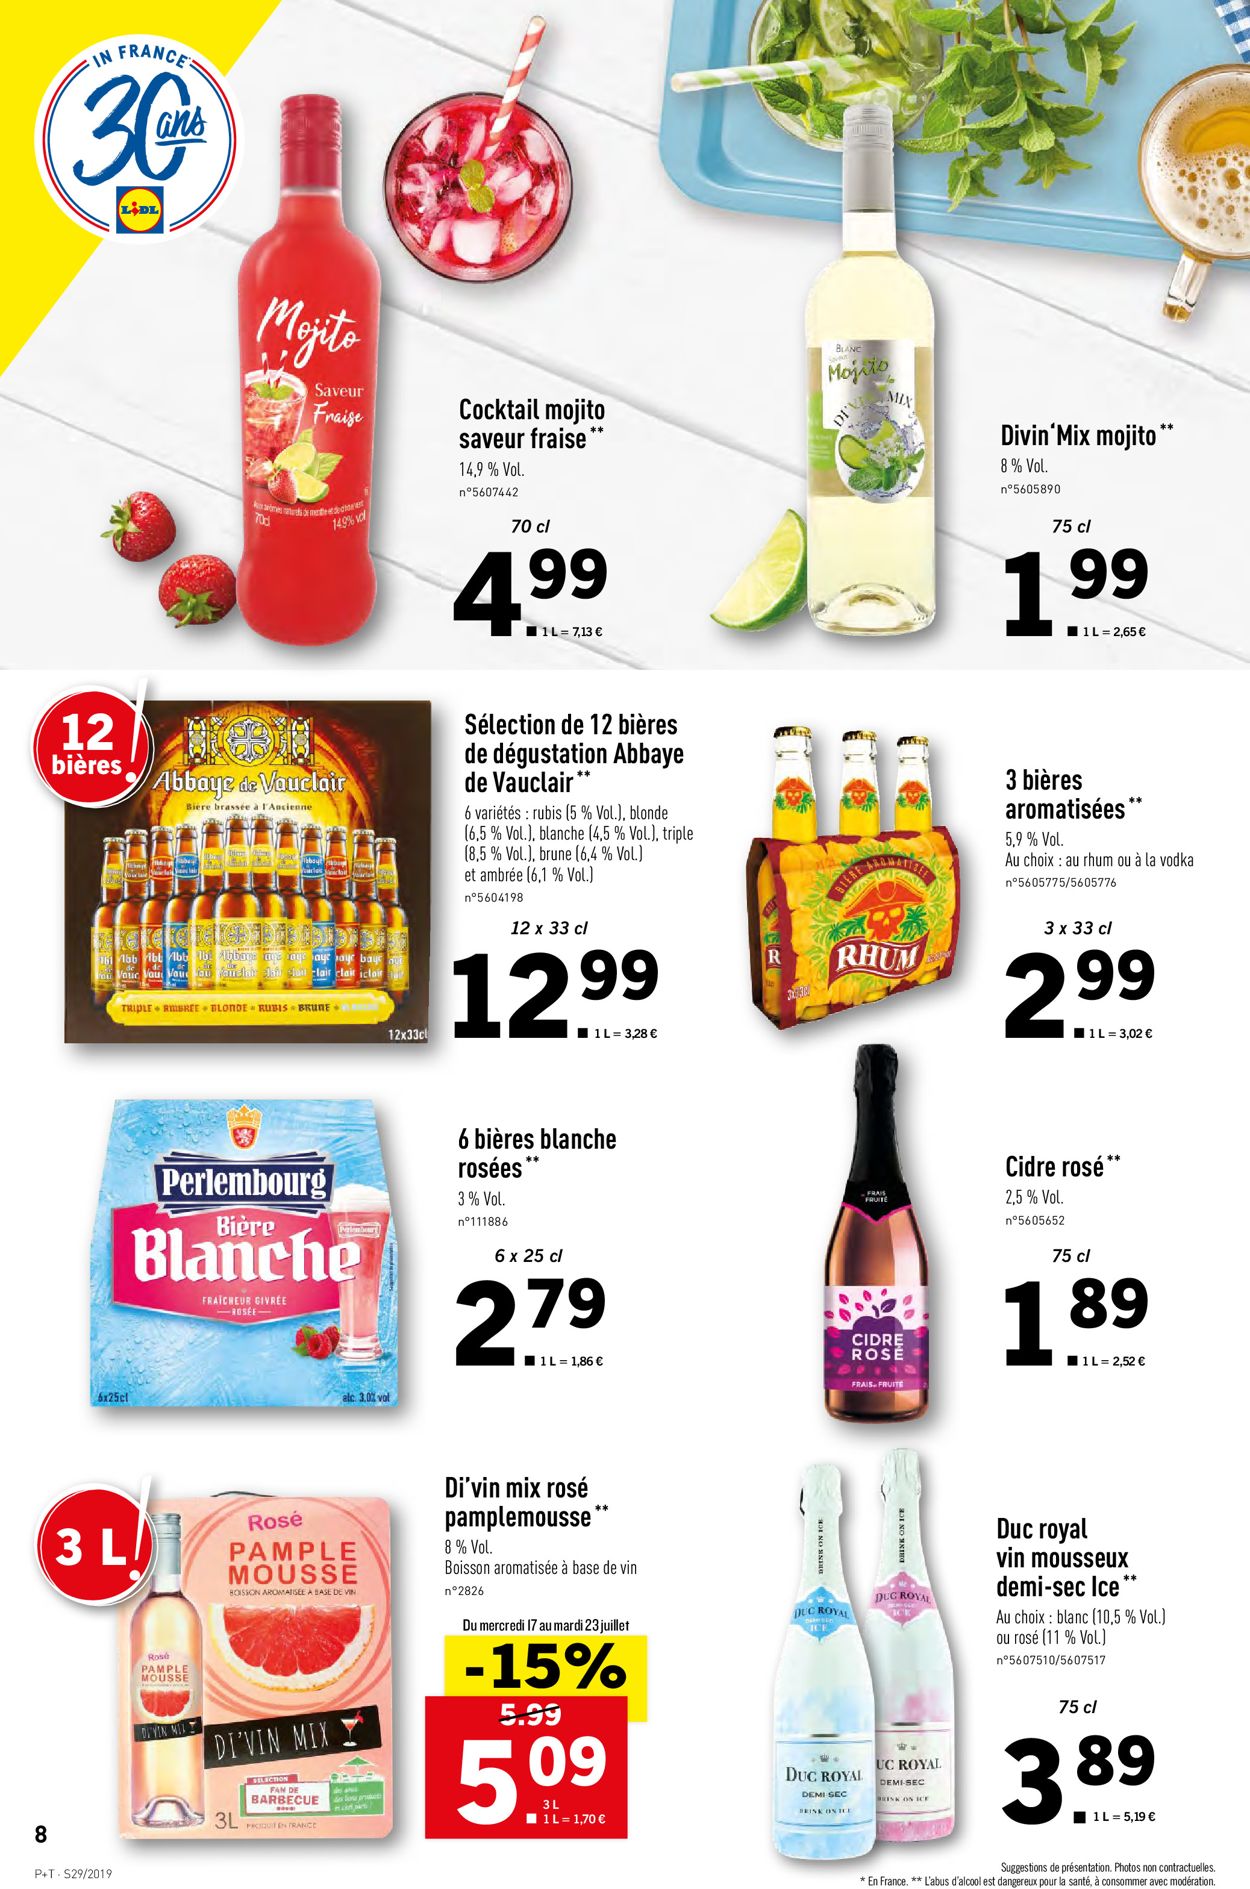 Lidl Catalogue - 17.07-23.07.2019 (Page 8)